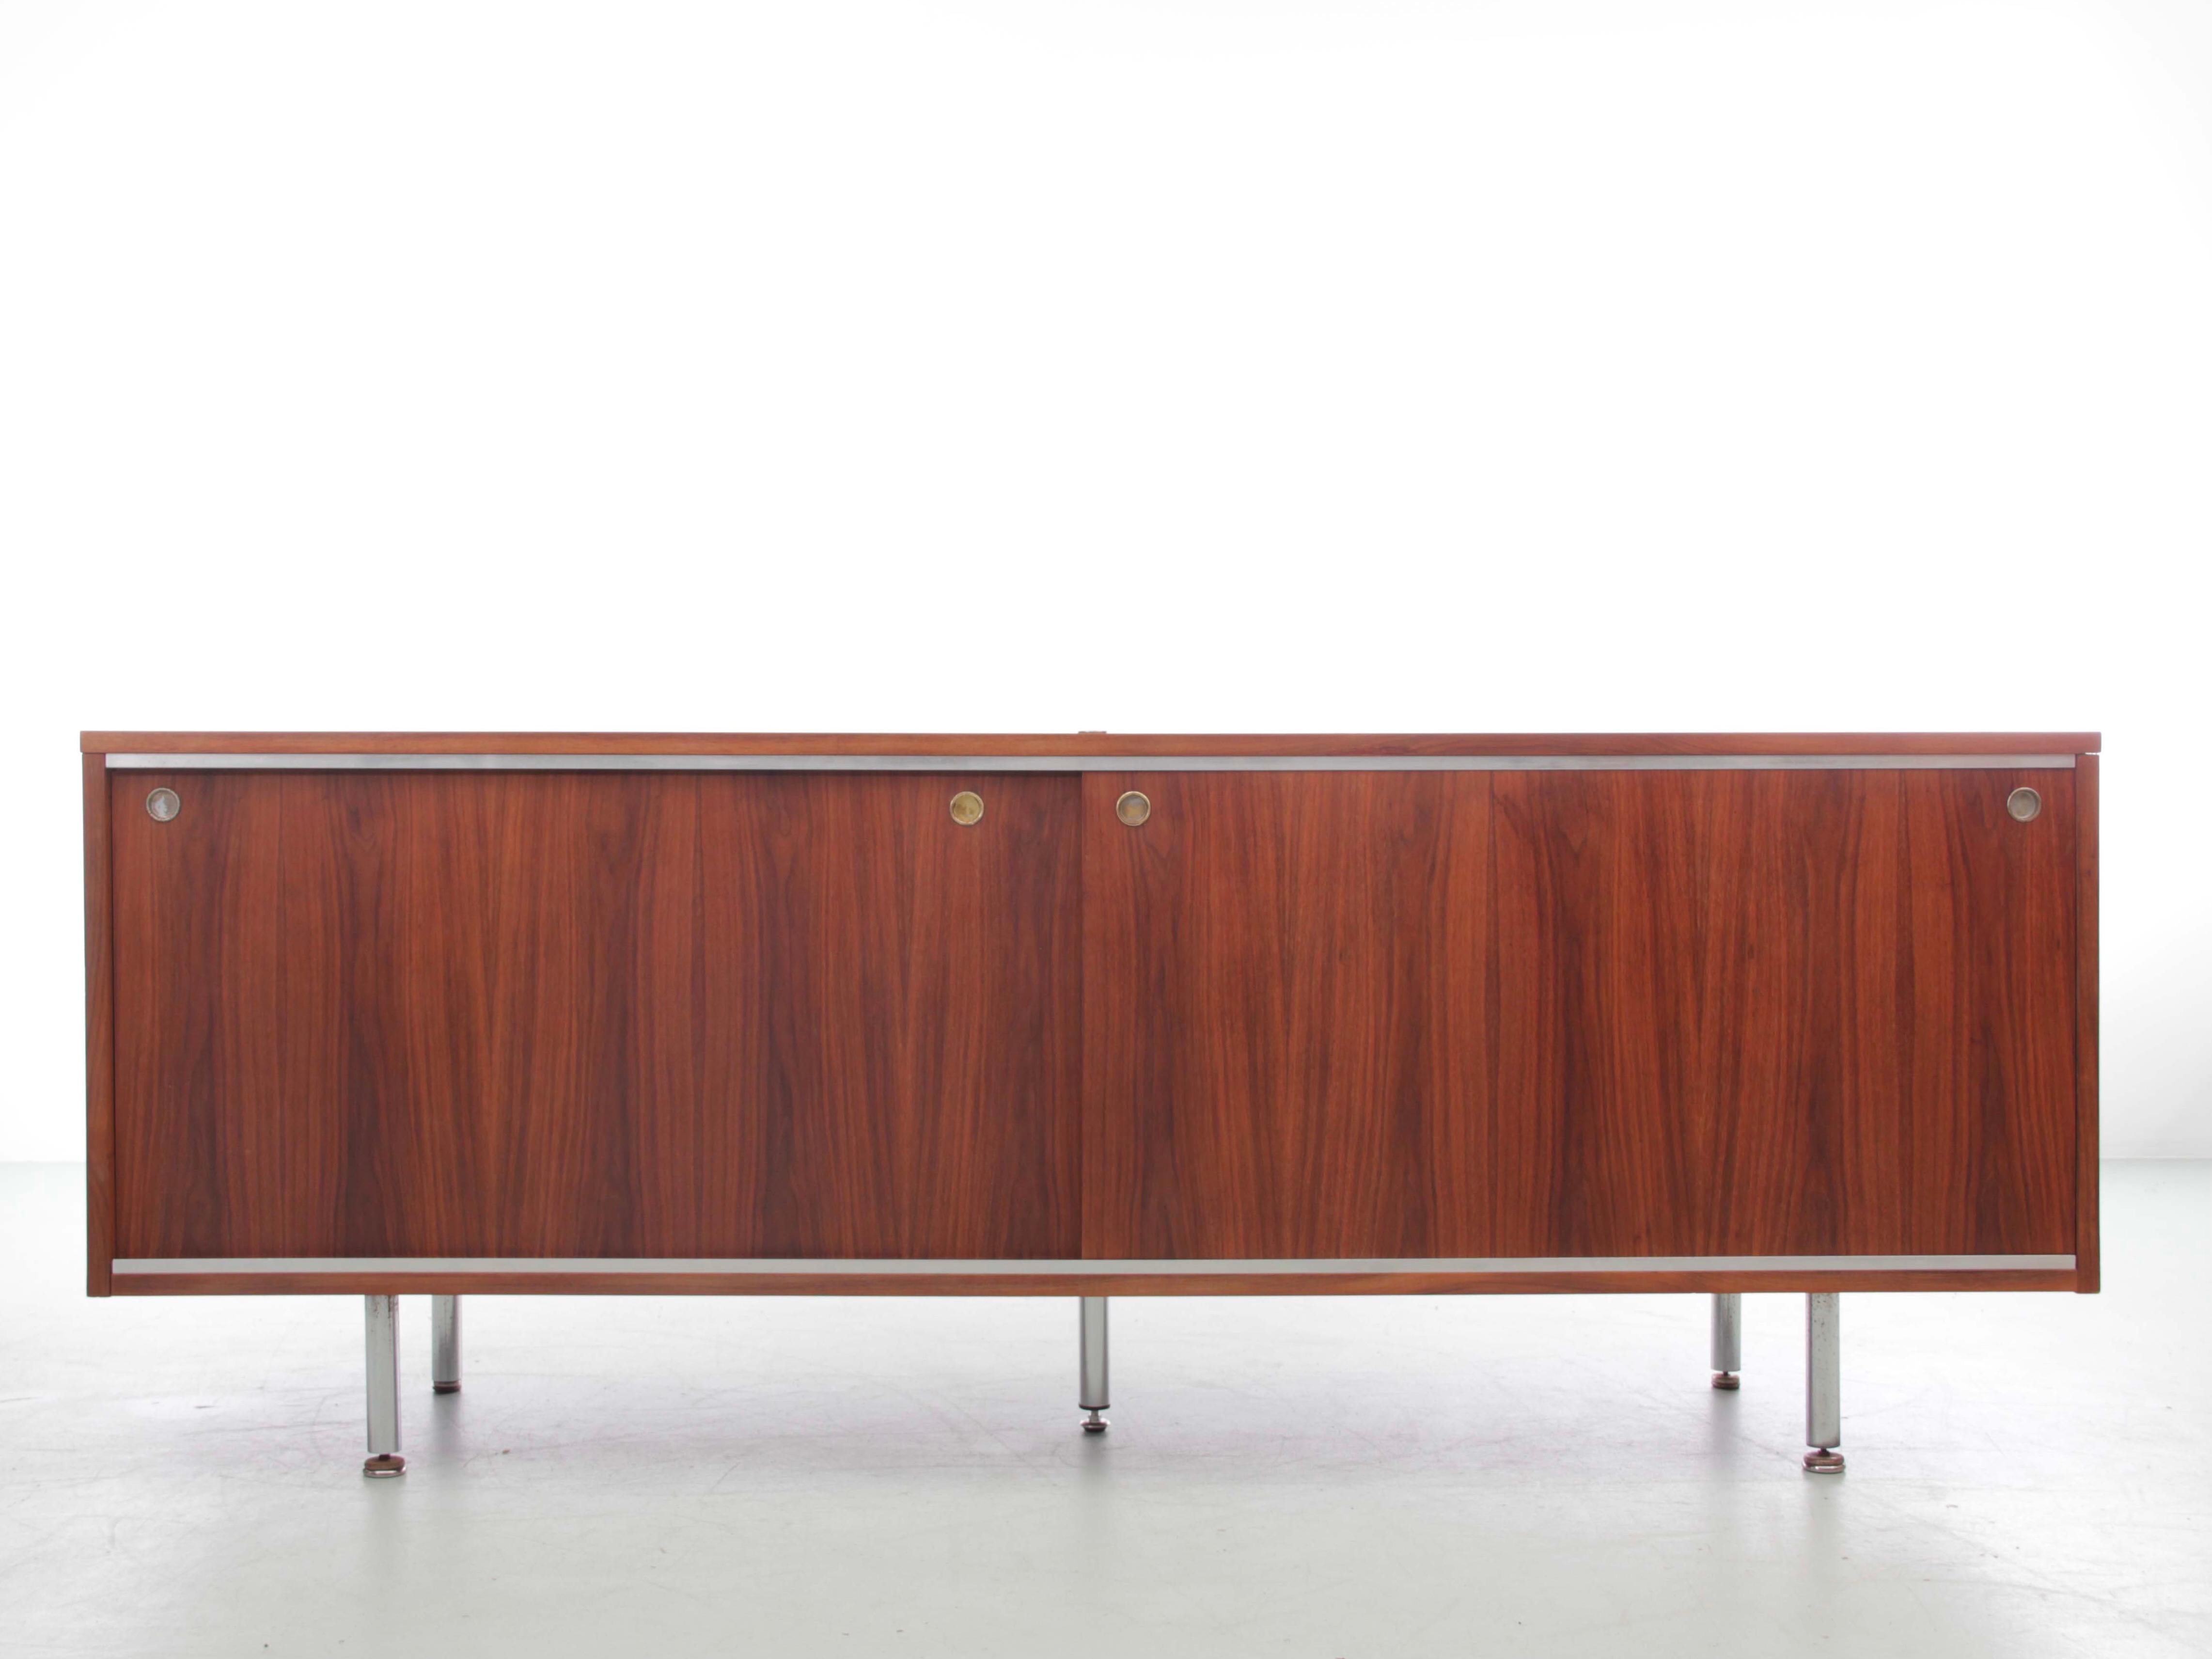 Teak sideboard by George Nelson for Herman Miller, 2 sliding doors, tubular chromed metal legs. Some scratches and repair.